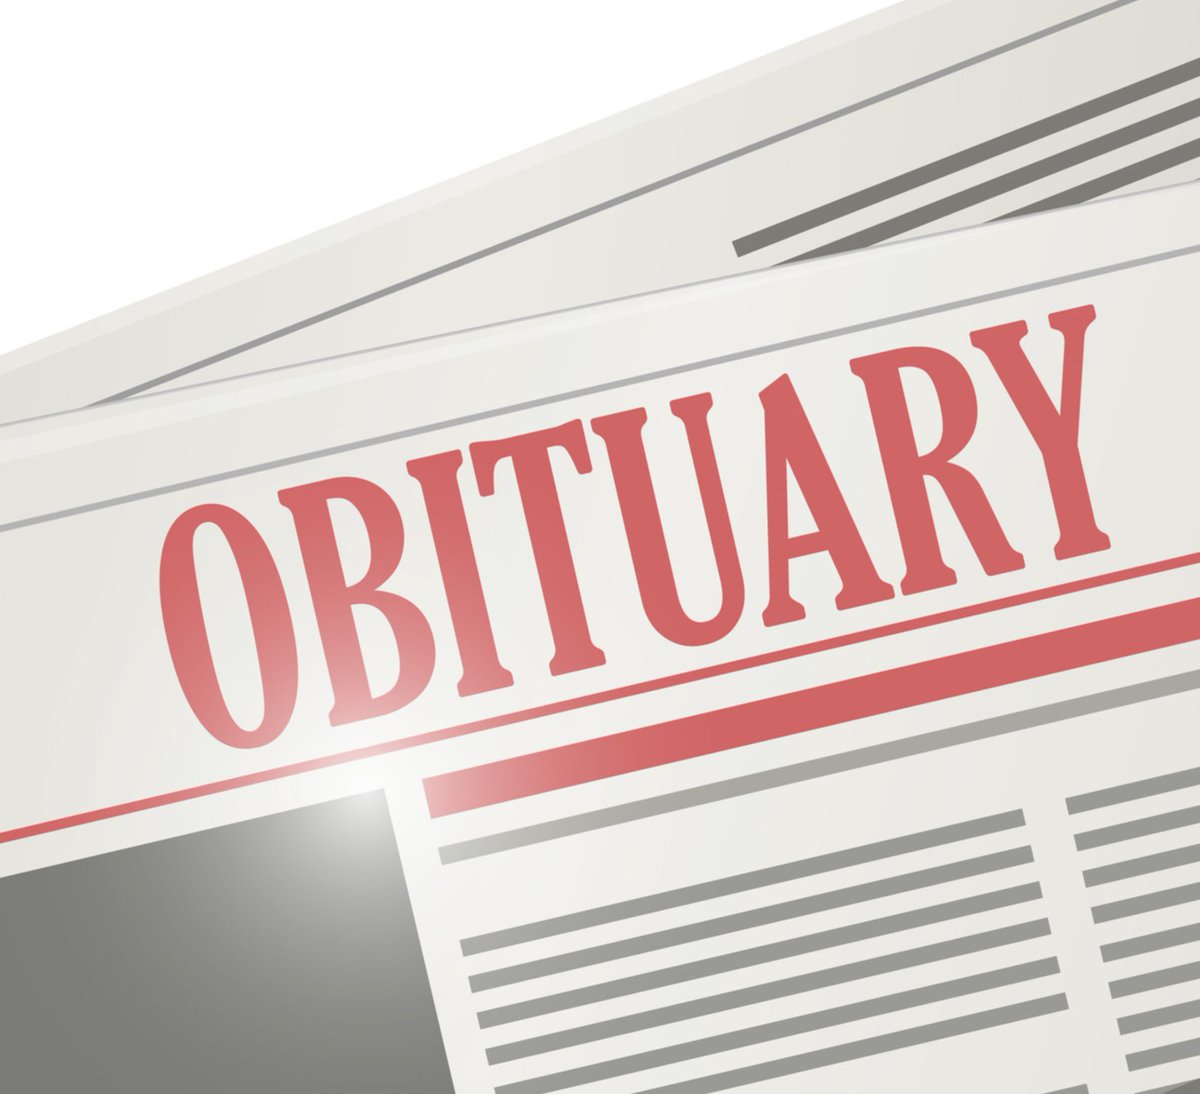 An obituary is often the first thing people read in the newspaper or online each day - and, for many, it will likely be the last thing written about their lives. Learn more with our Obituary – Quick and Easy Guide hubs.li/Q02mxmZ00